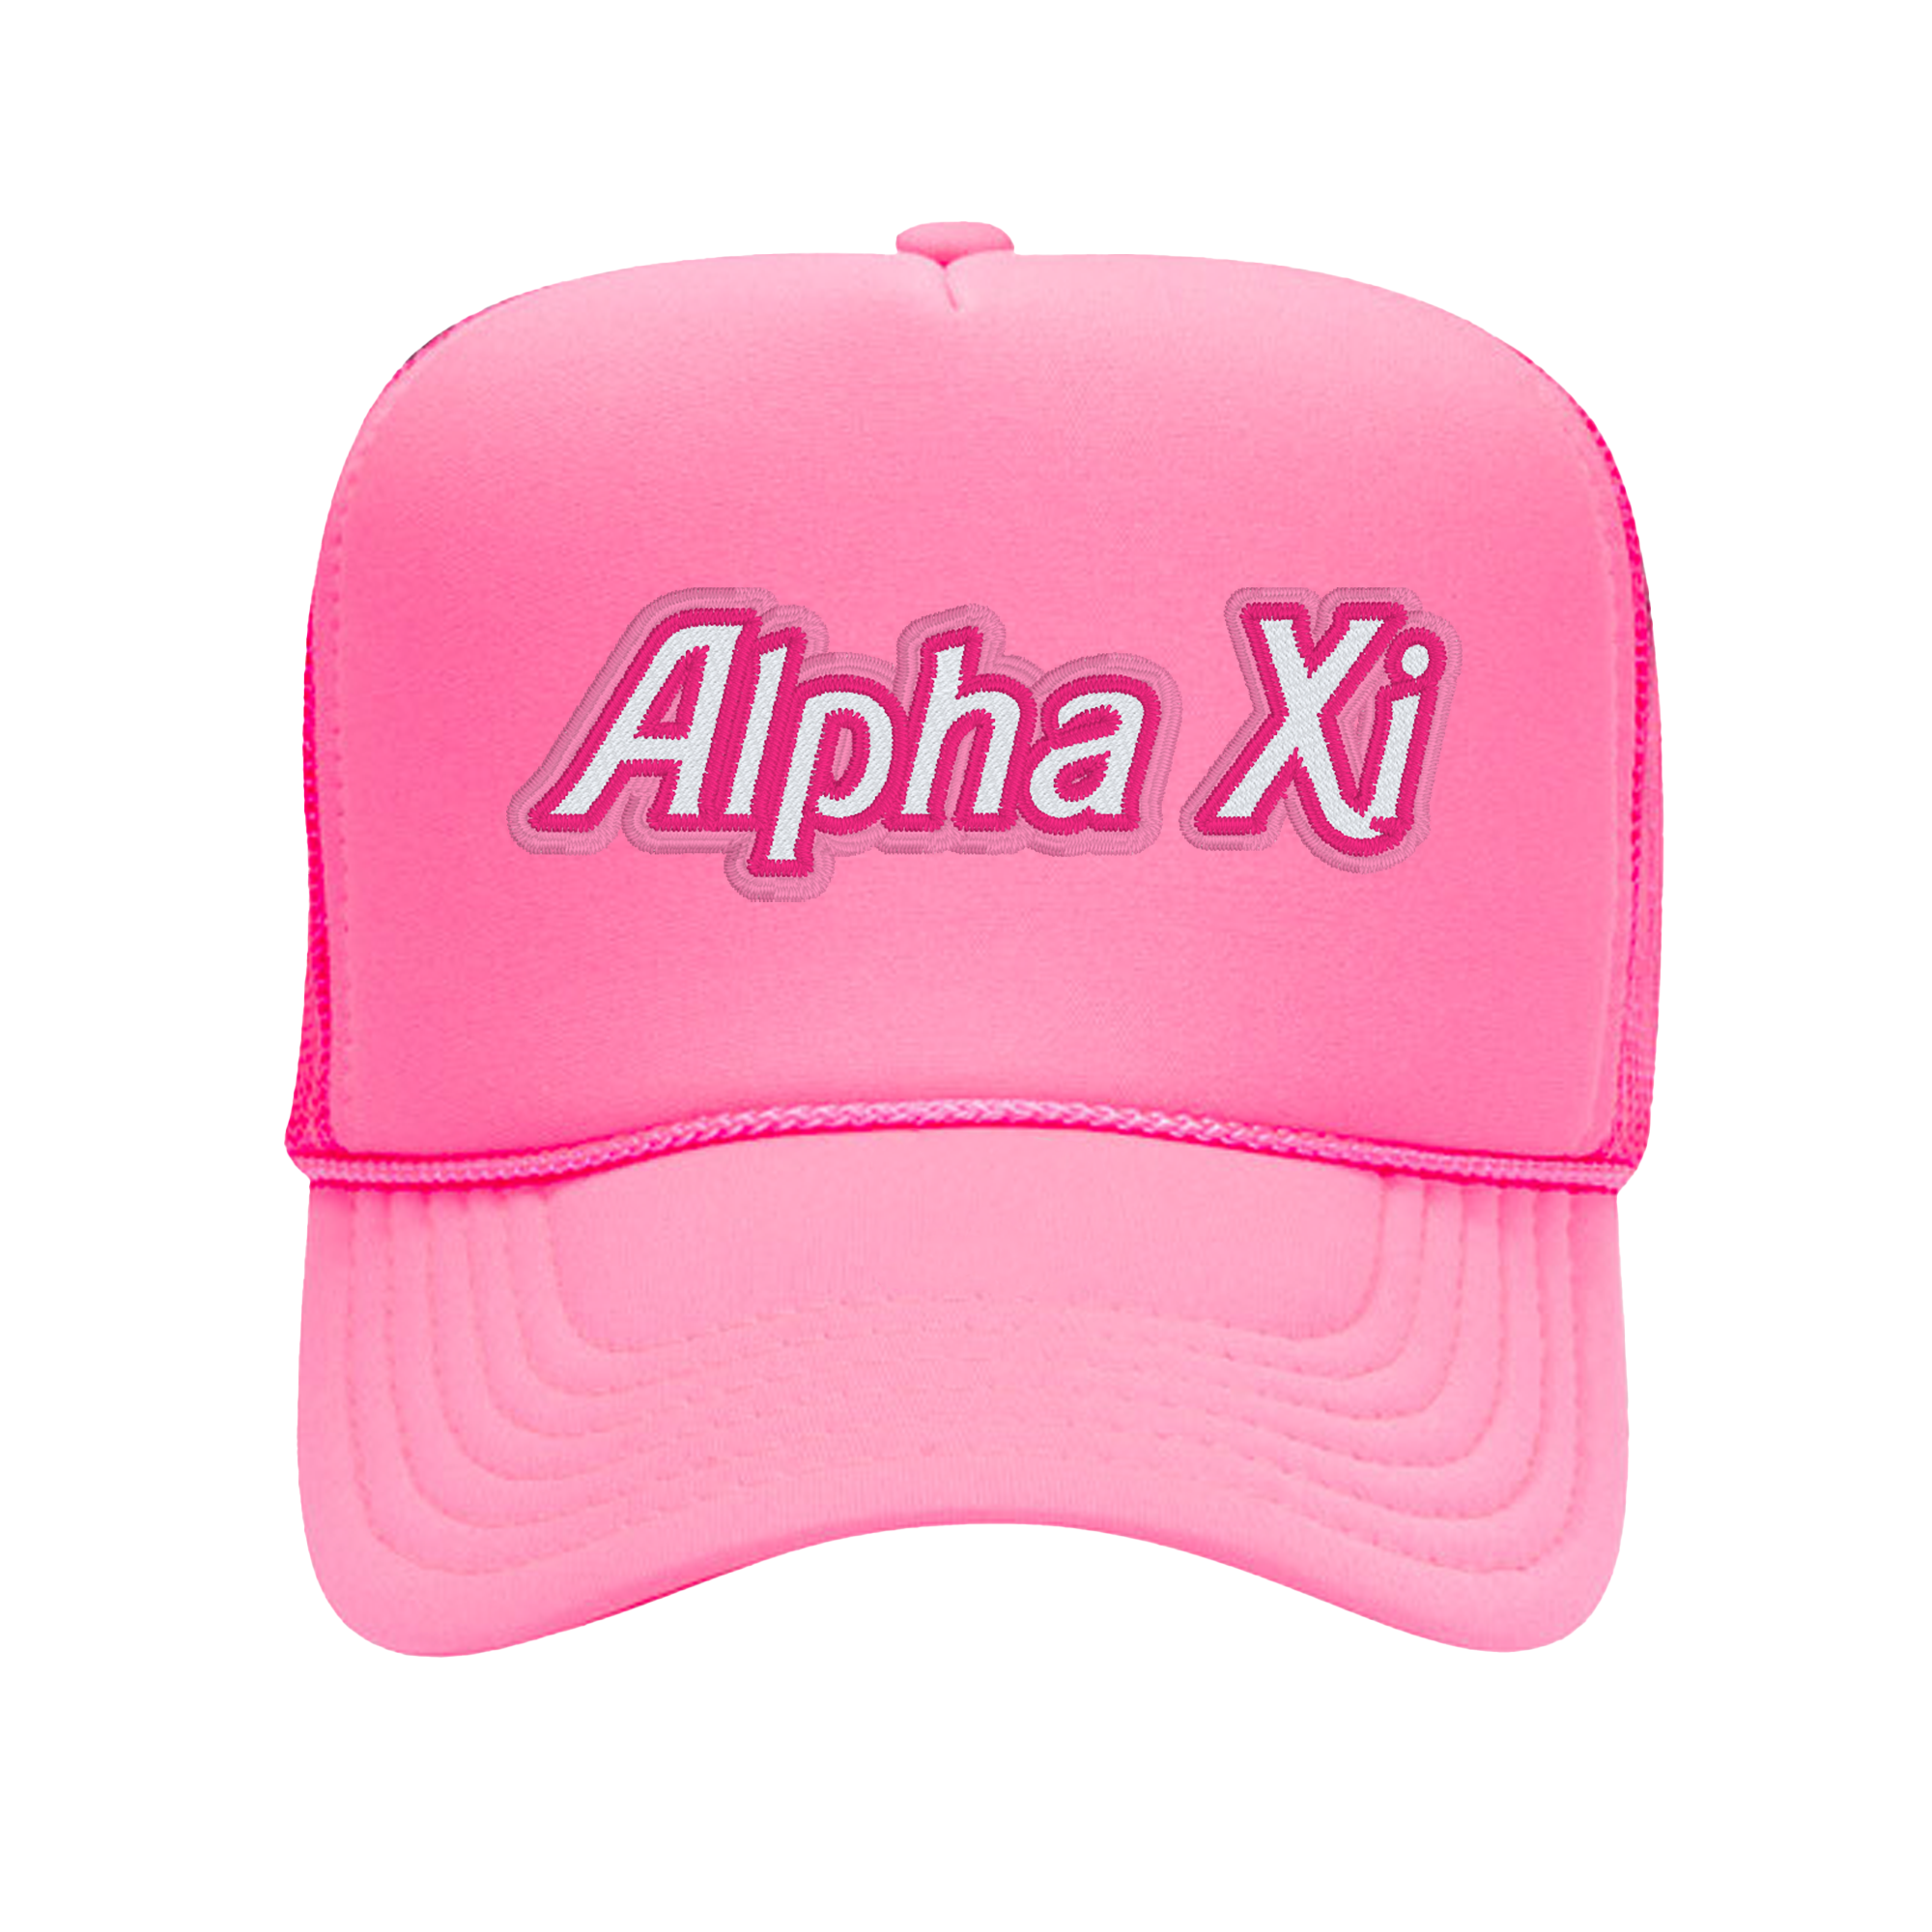 a pink hat with the word alpha xi on it